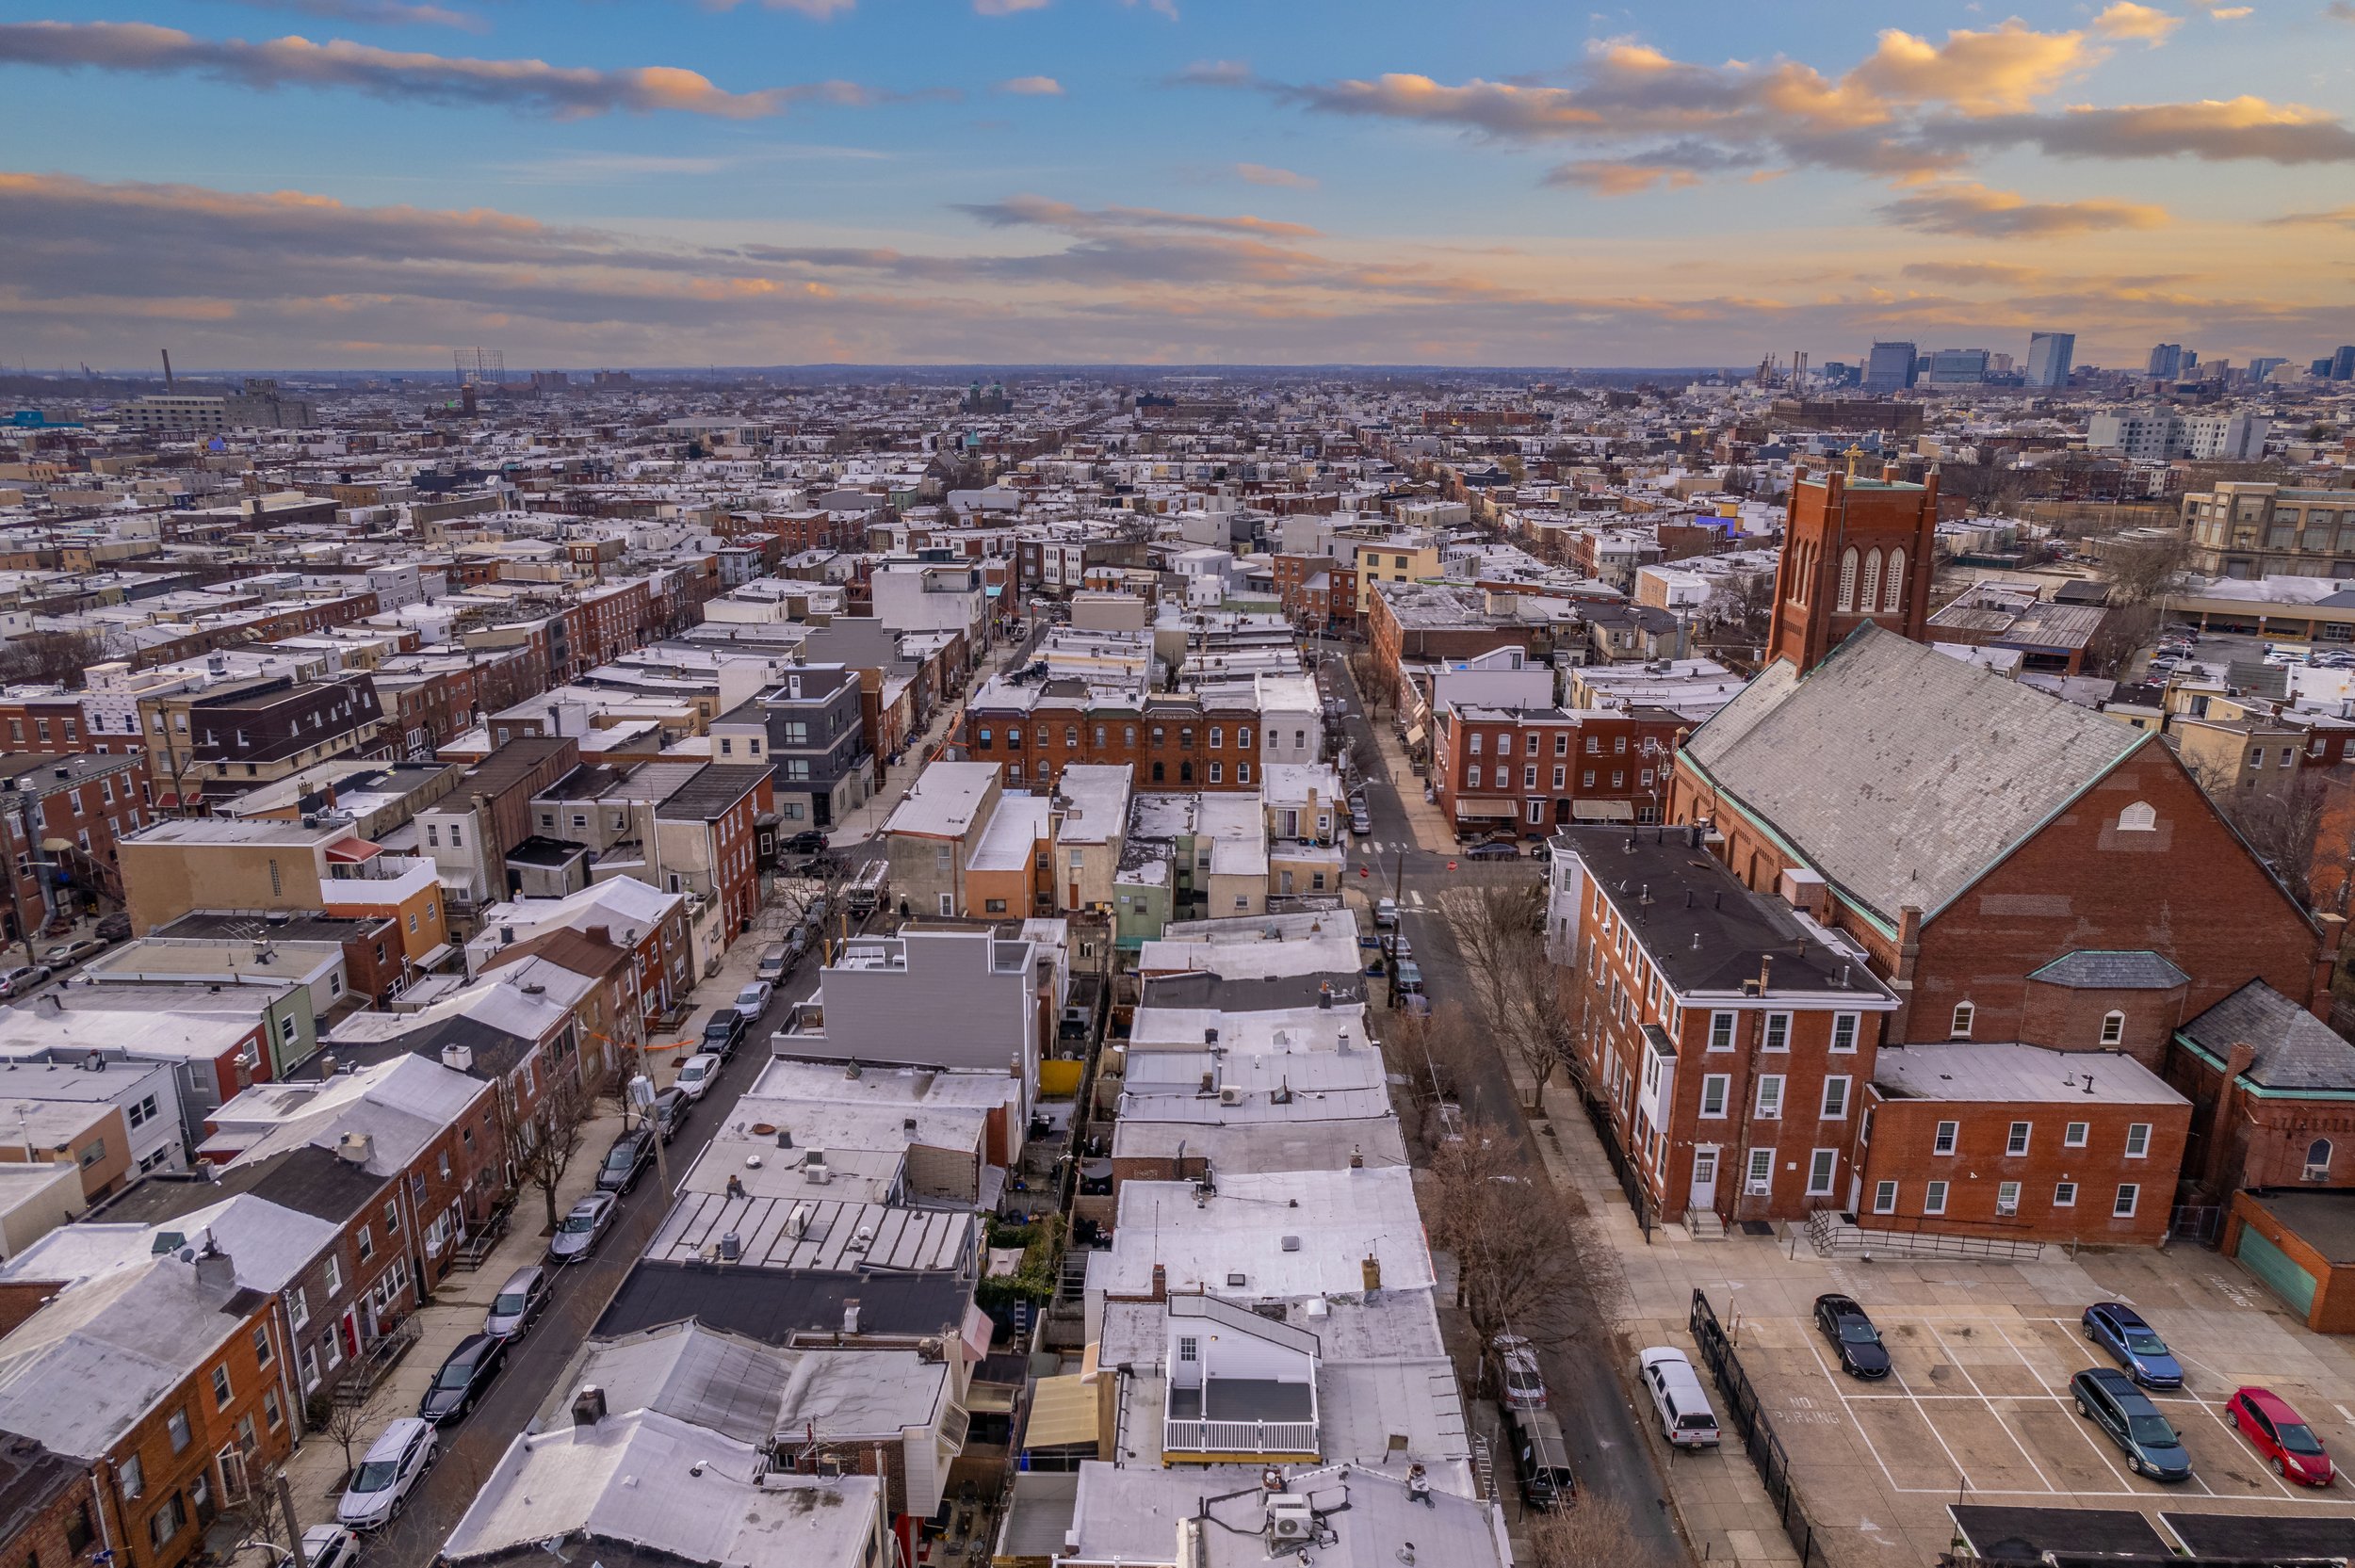 914 GREENWICH ST AERIAL PHOTOGRAPHY Ⓒ WEFILMPHILLY-4.jpg